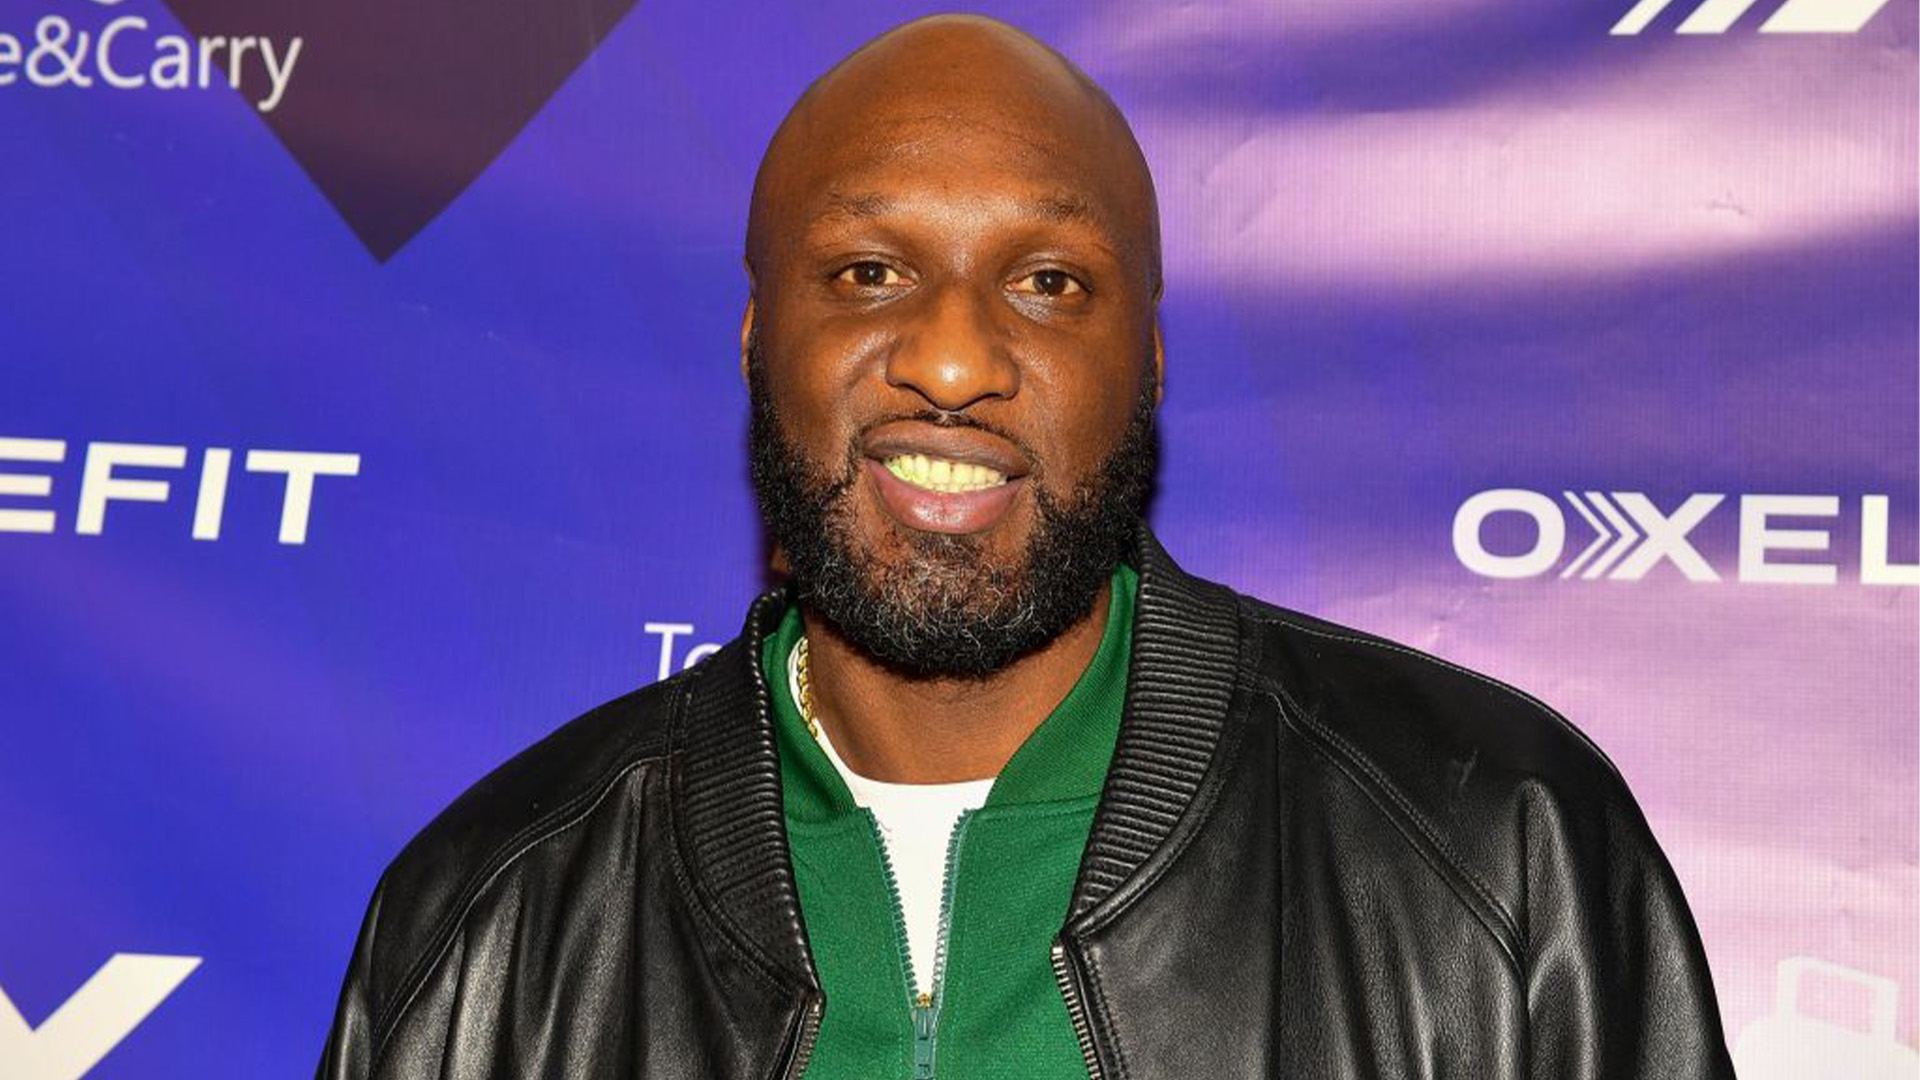 Lamar Odom  Acquires 3 Rehabilitation And Wellness Centers In California — 'God Saved Me So I Can Save Others'